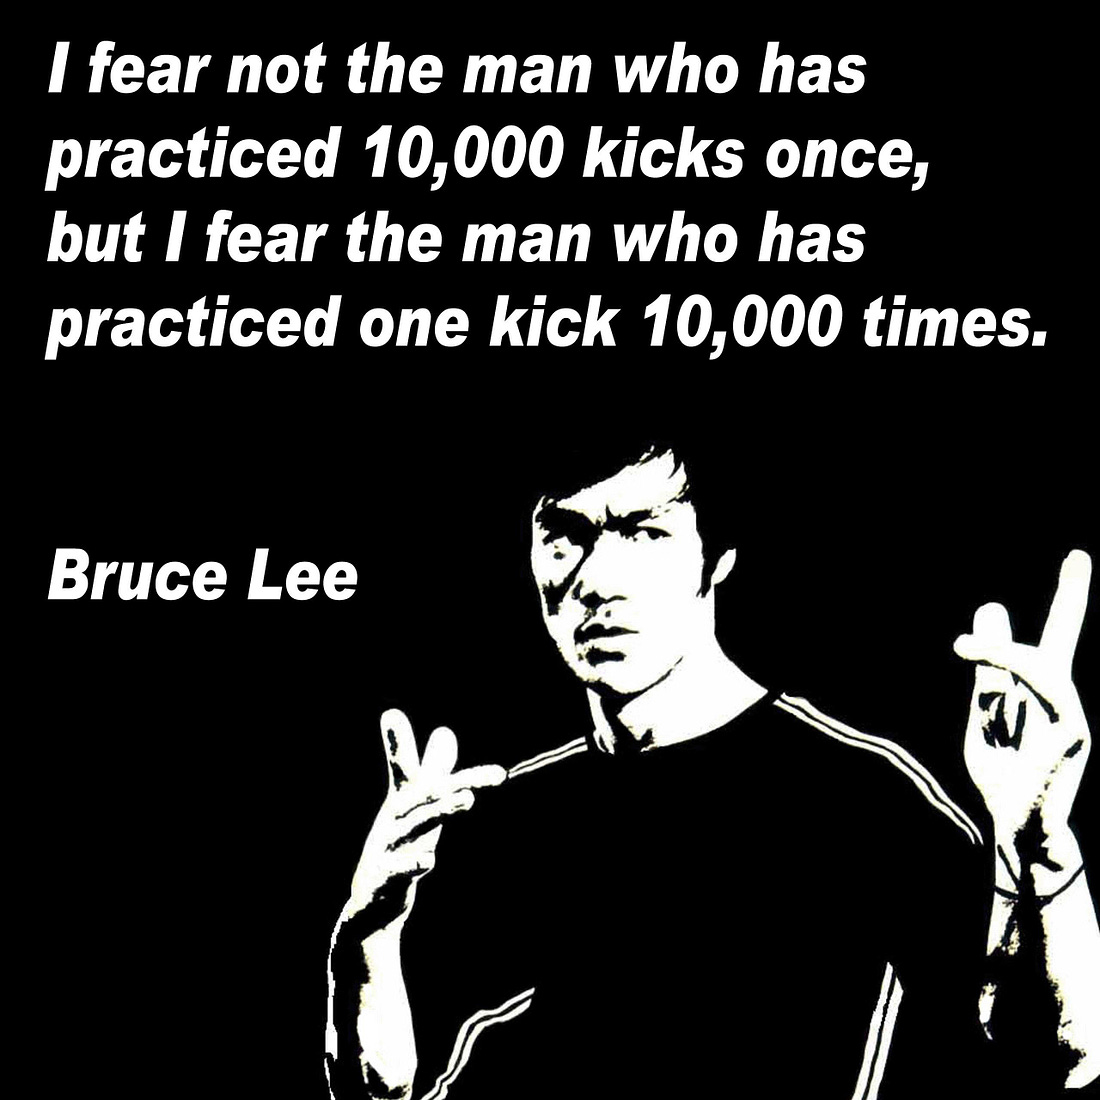 Image] I fear not the man who has practiced 10,000 kicks once, but I fear  the man who has practiced one kick 10,000 times. Bruce Lee: GetMotivated